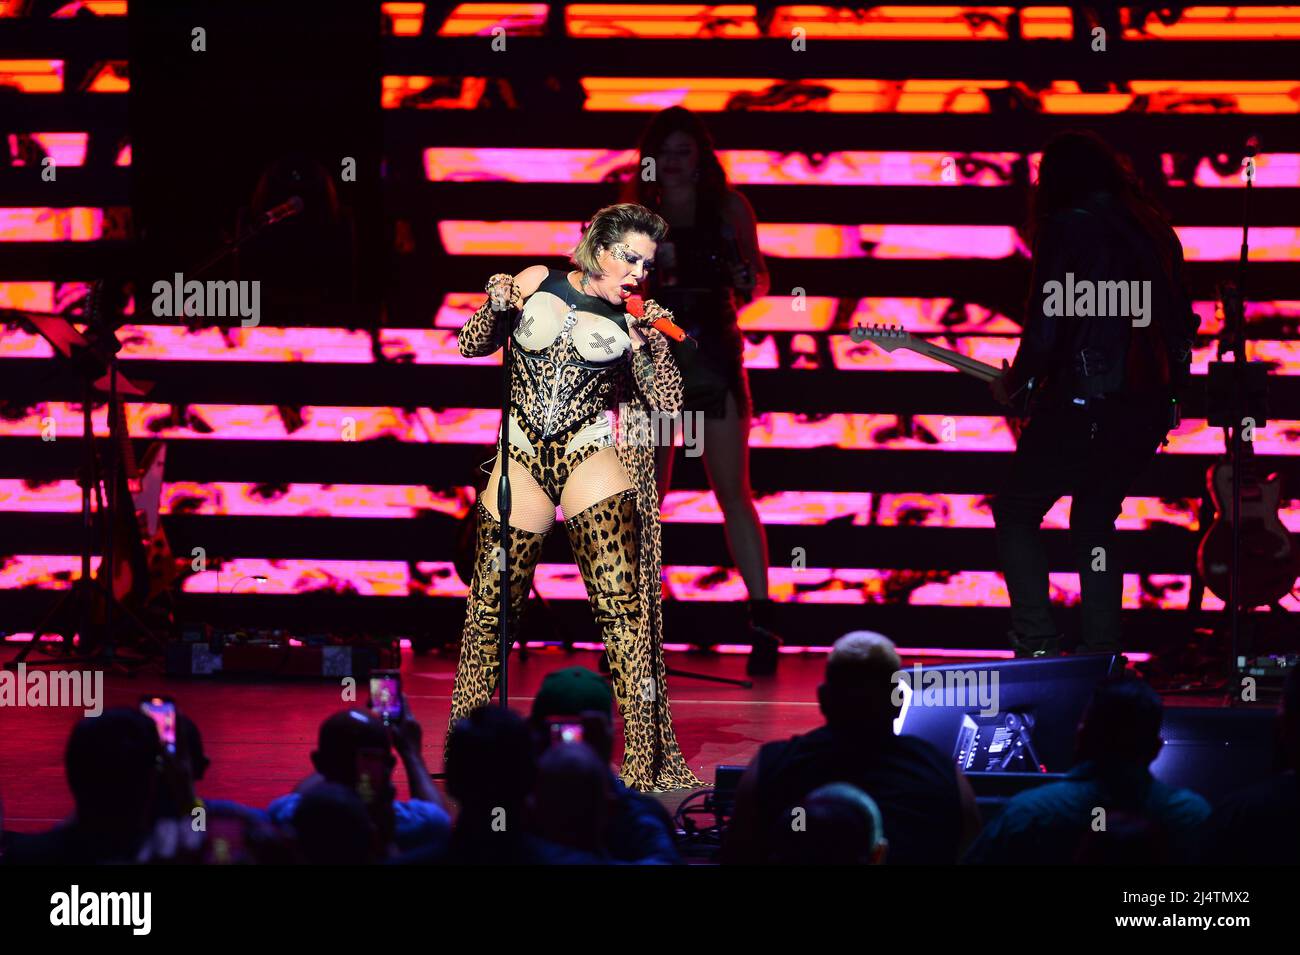 Hollywood, Florida, USA. 16th Apr, 2022. Alejandra Guzman performs onstage during The Perrisimas Tour at Hard Rock Live in the Seminole Hard Rock Hotel & Casino on April 16, 2022 in Hollywood, Florida. Credit: Mpi10/Media Punch/Alamy Live News Stock Photo